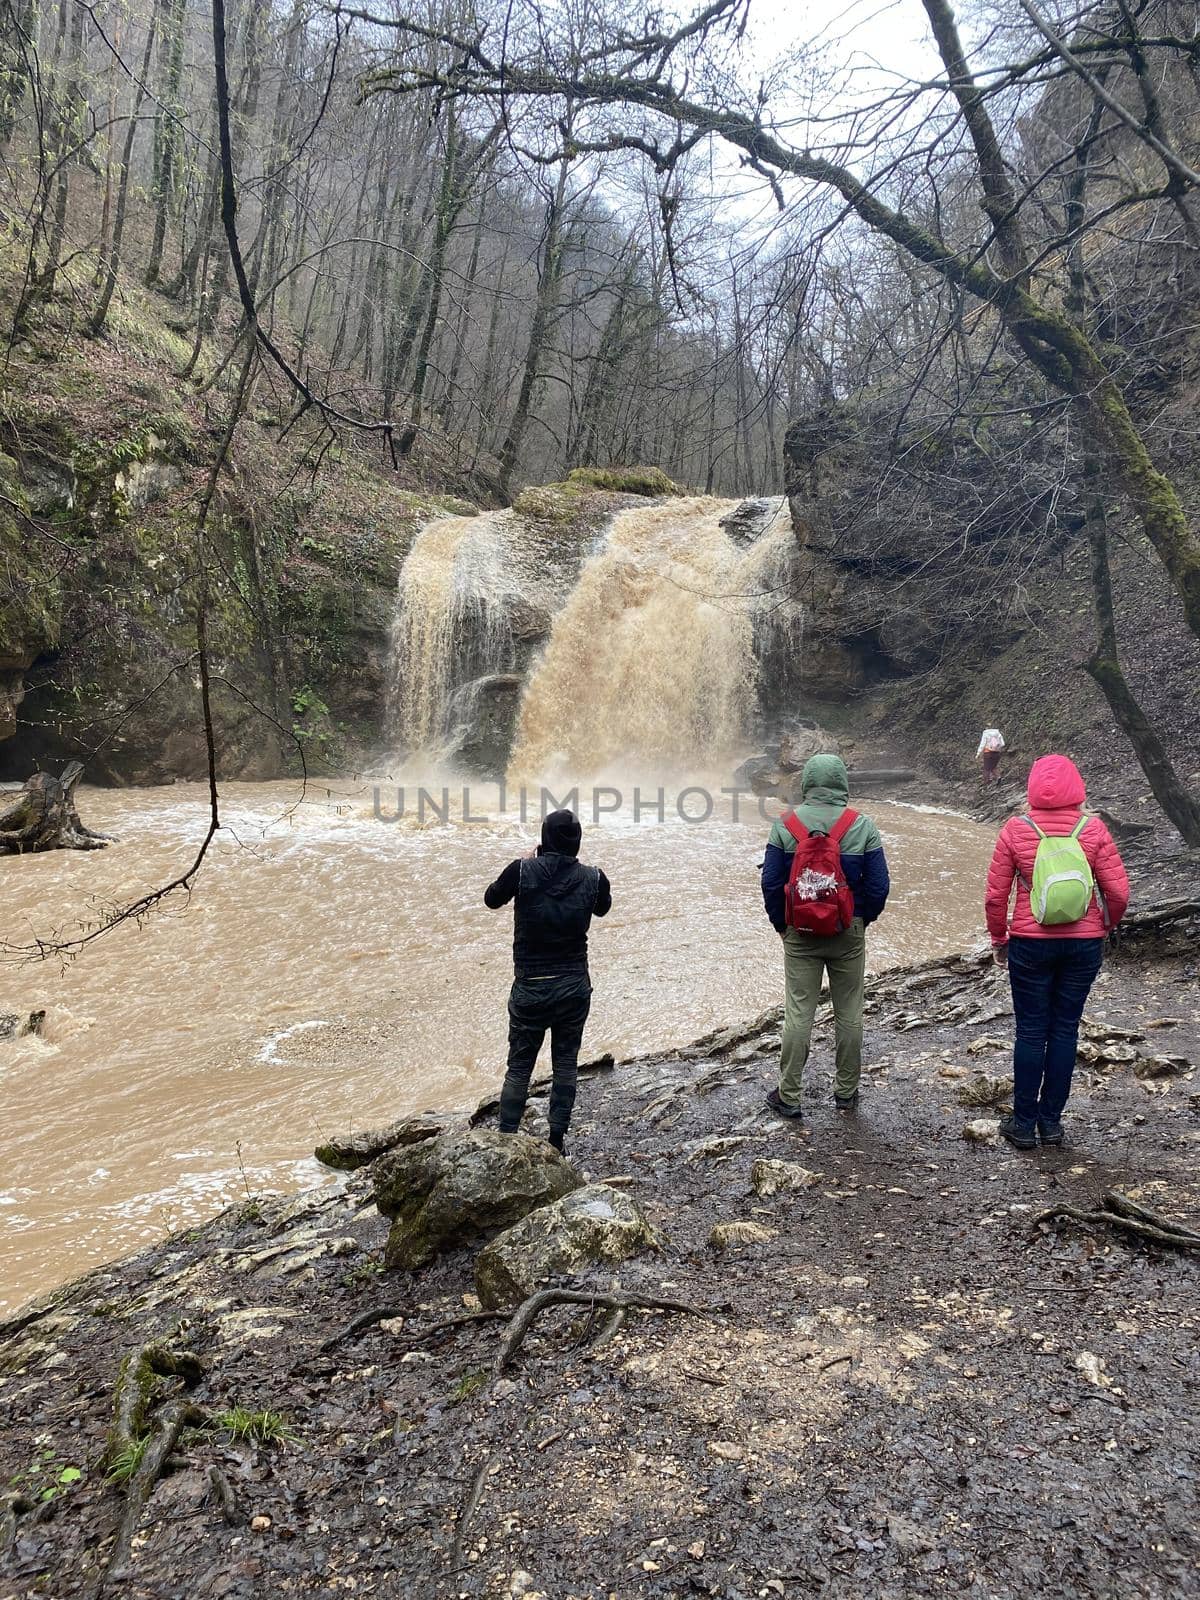 Guamka, Russia april 17, 2021: Beautiful landscape of powerful muddy waterfall in mountainous terrain. Dirty mountain waterway flows down and splashes. by epidemiks